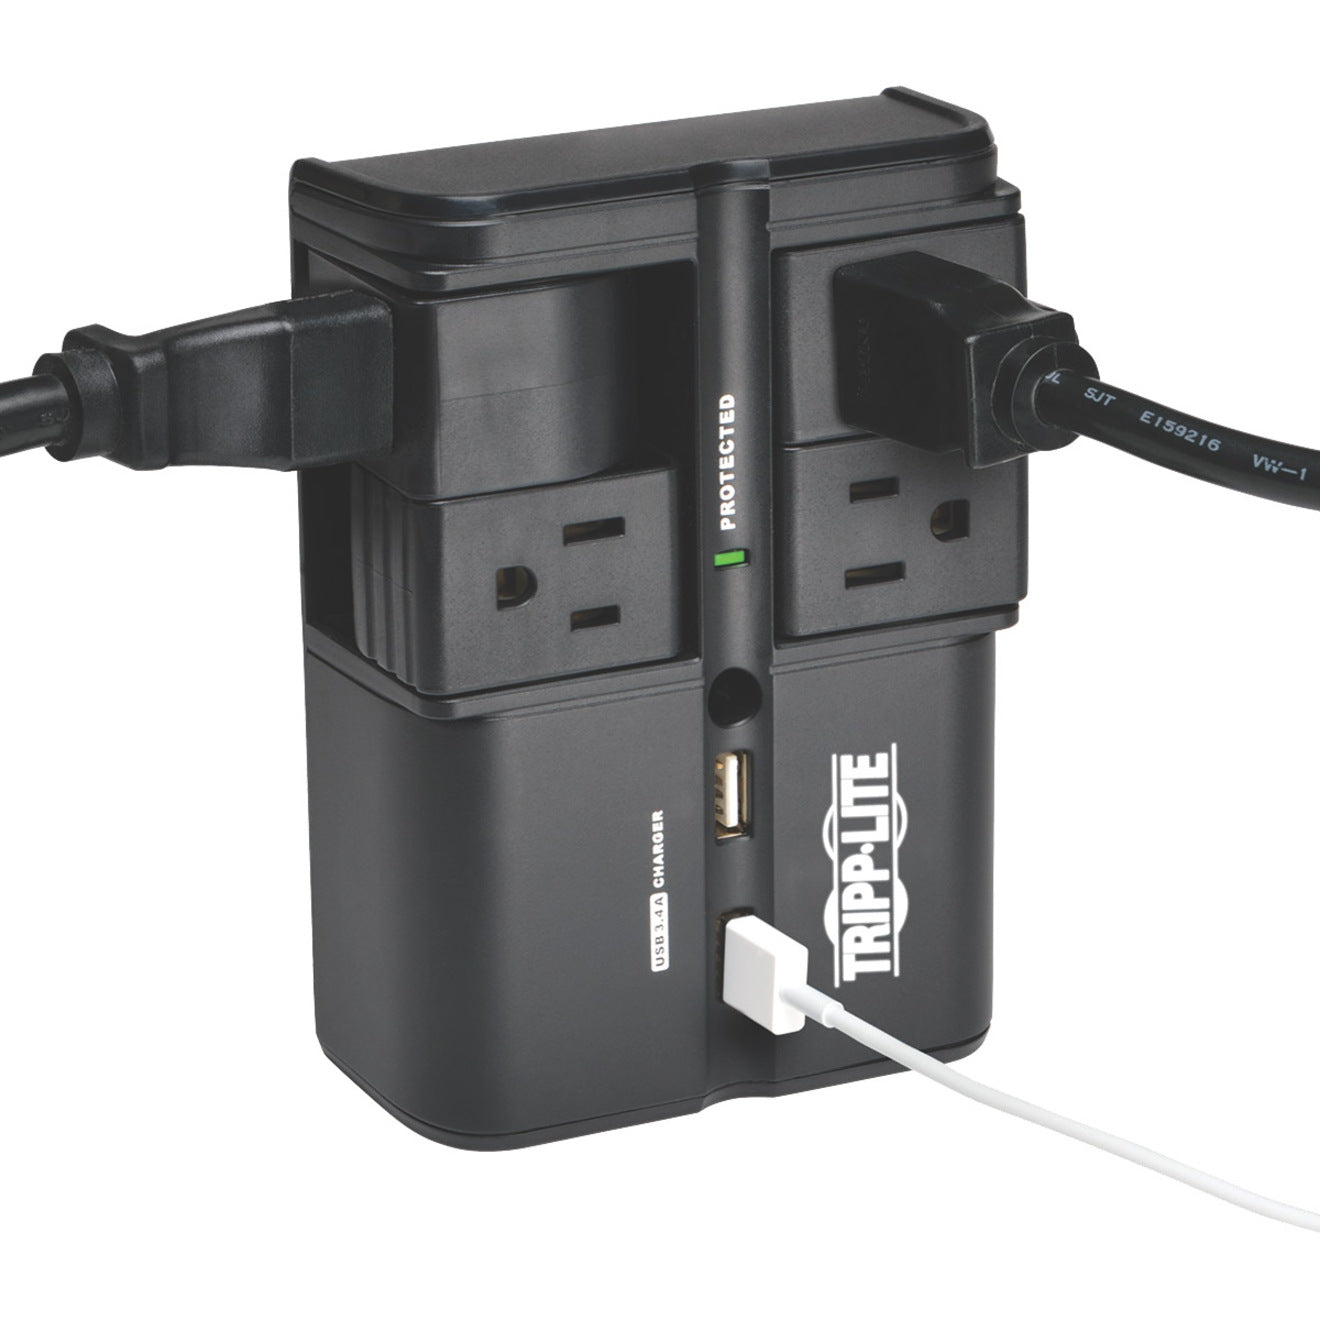 Tripp Lite SK40RUSBB Protect It! Surge Suppressor/Protector, 4 Rotatable Outlets Plug-in 1080 Charger